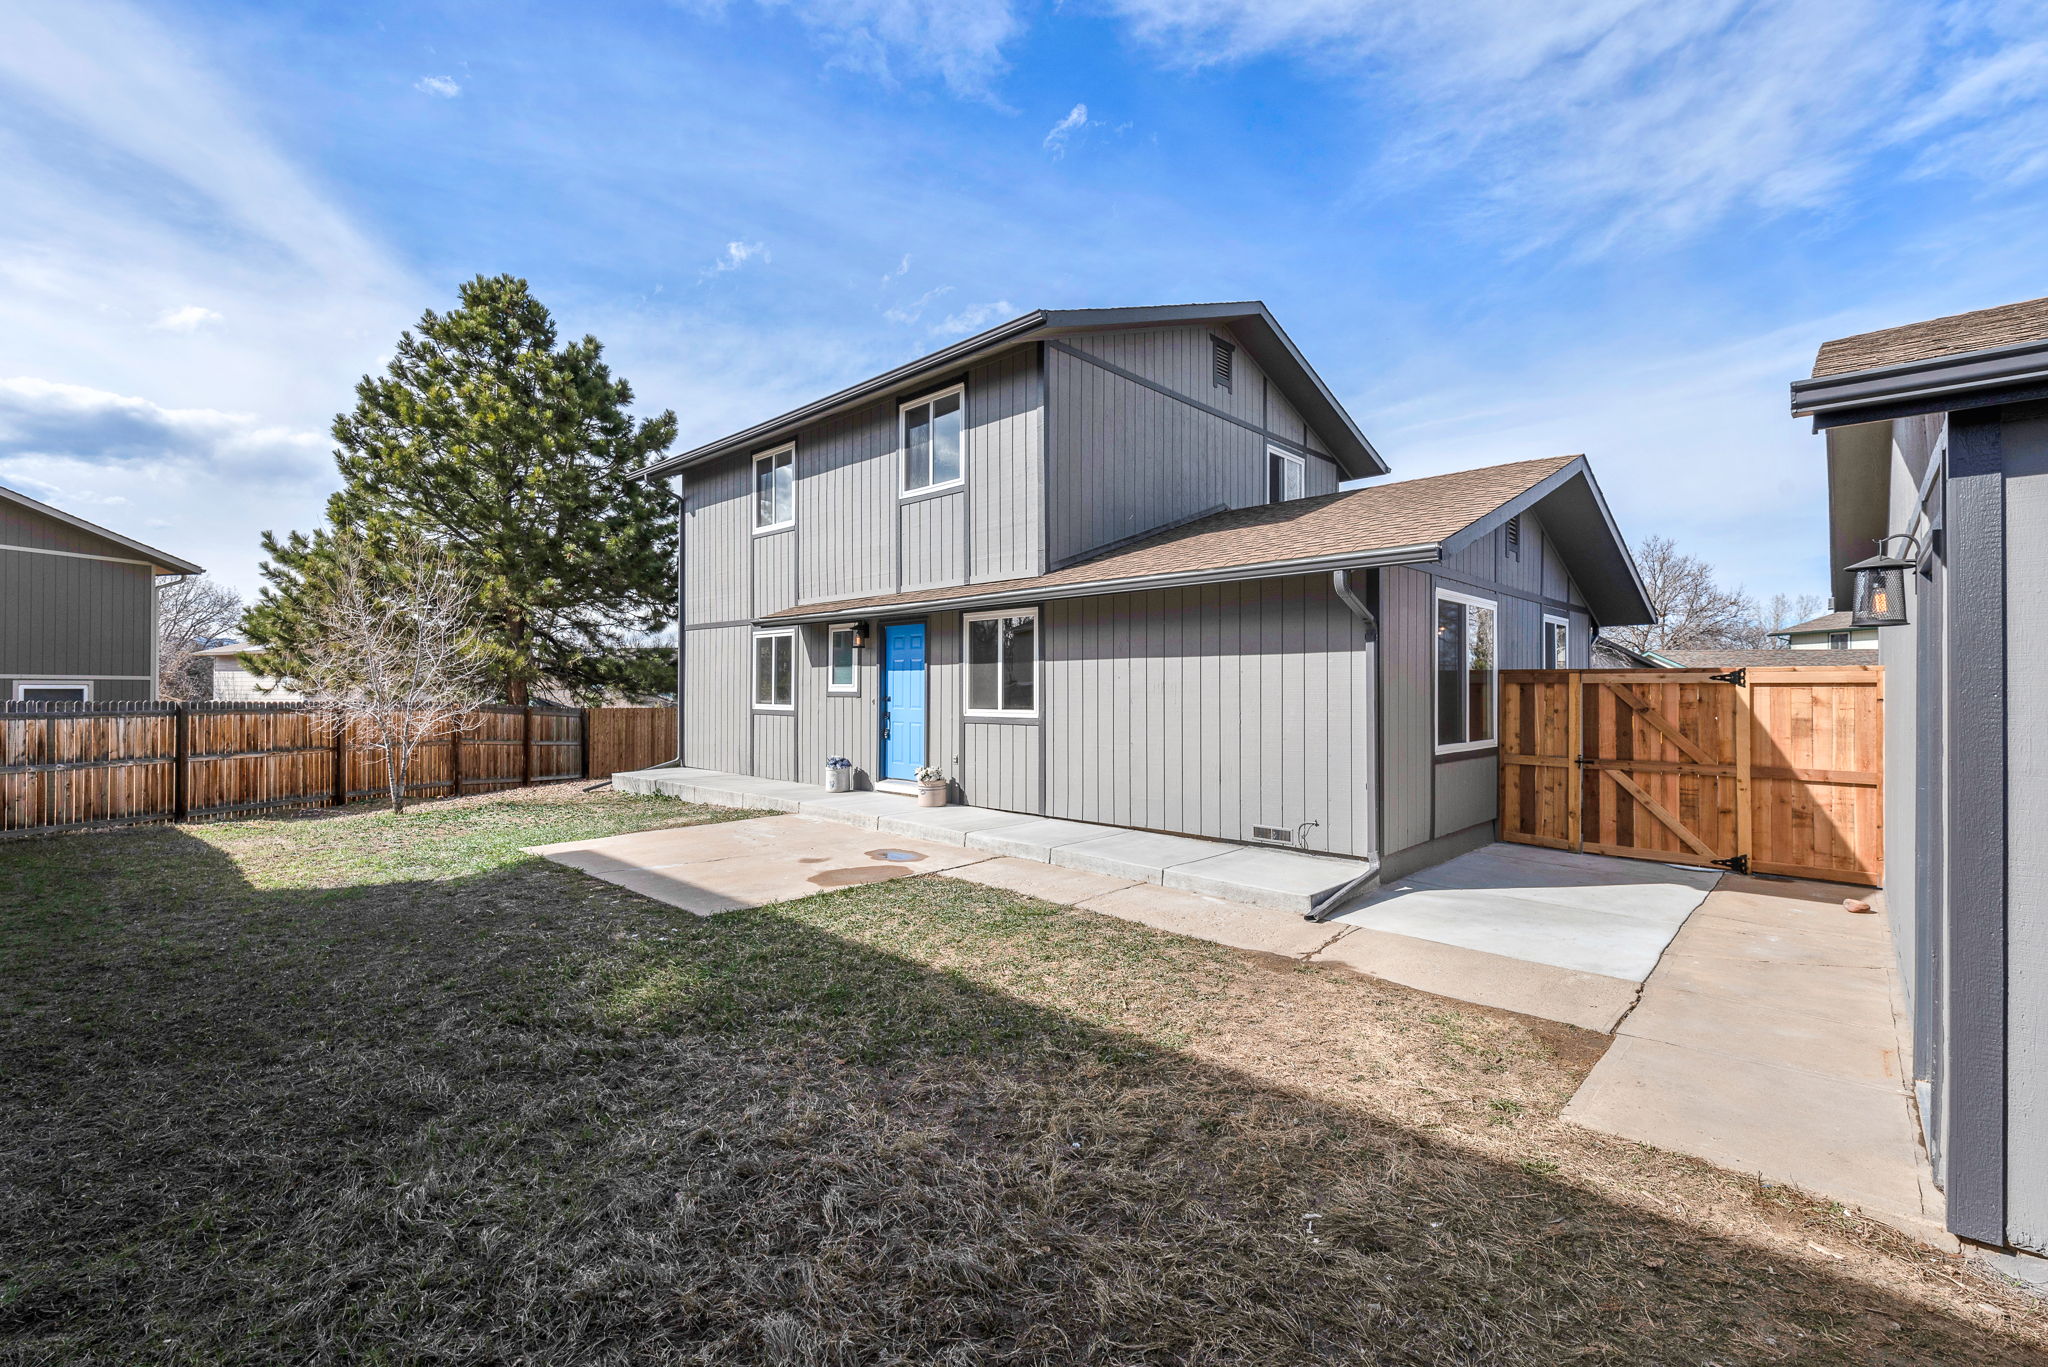  9323 N Ingalls St, Westminster, CO 80031, US Photo 4